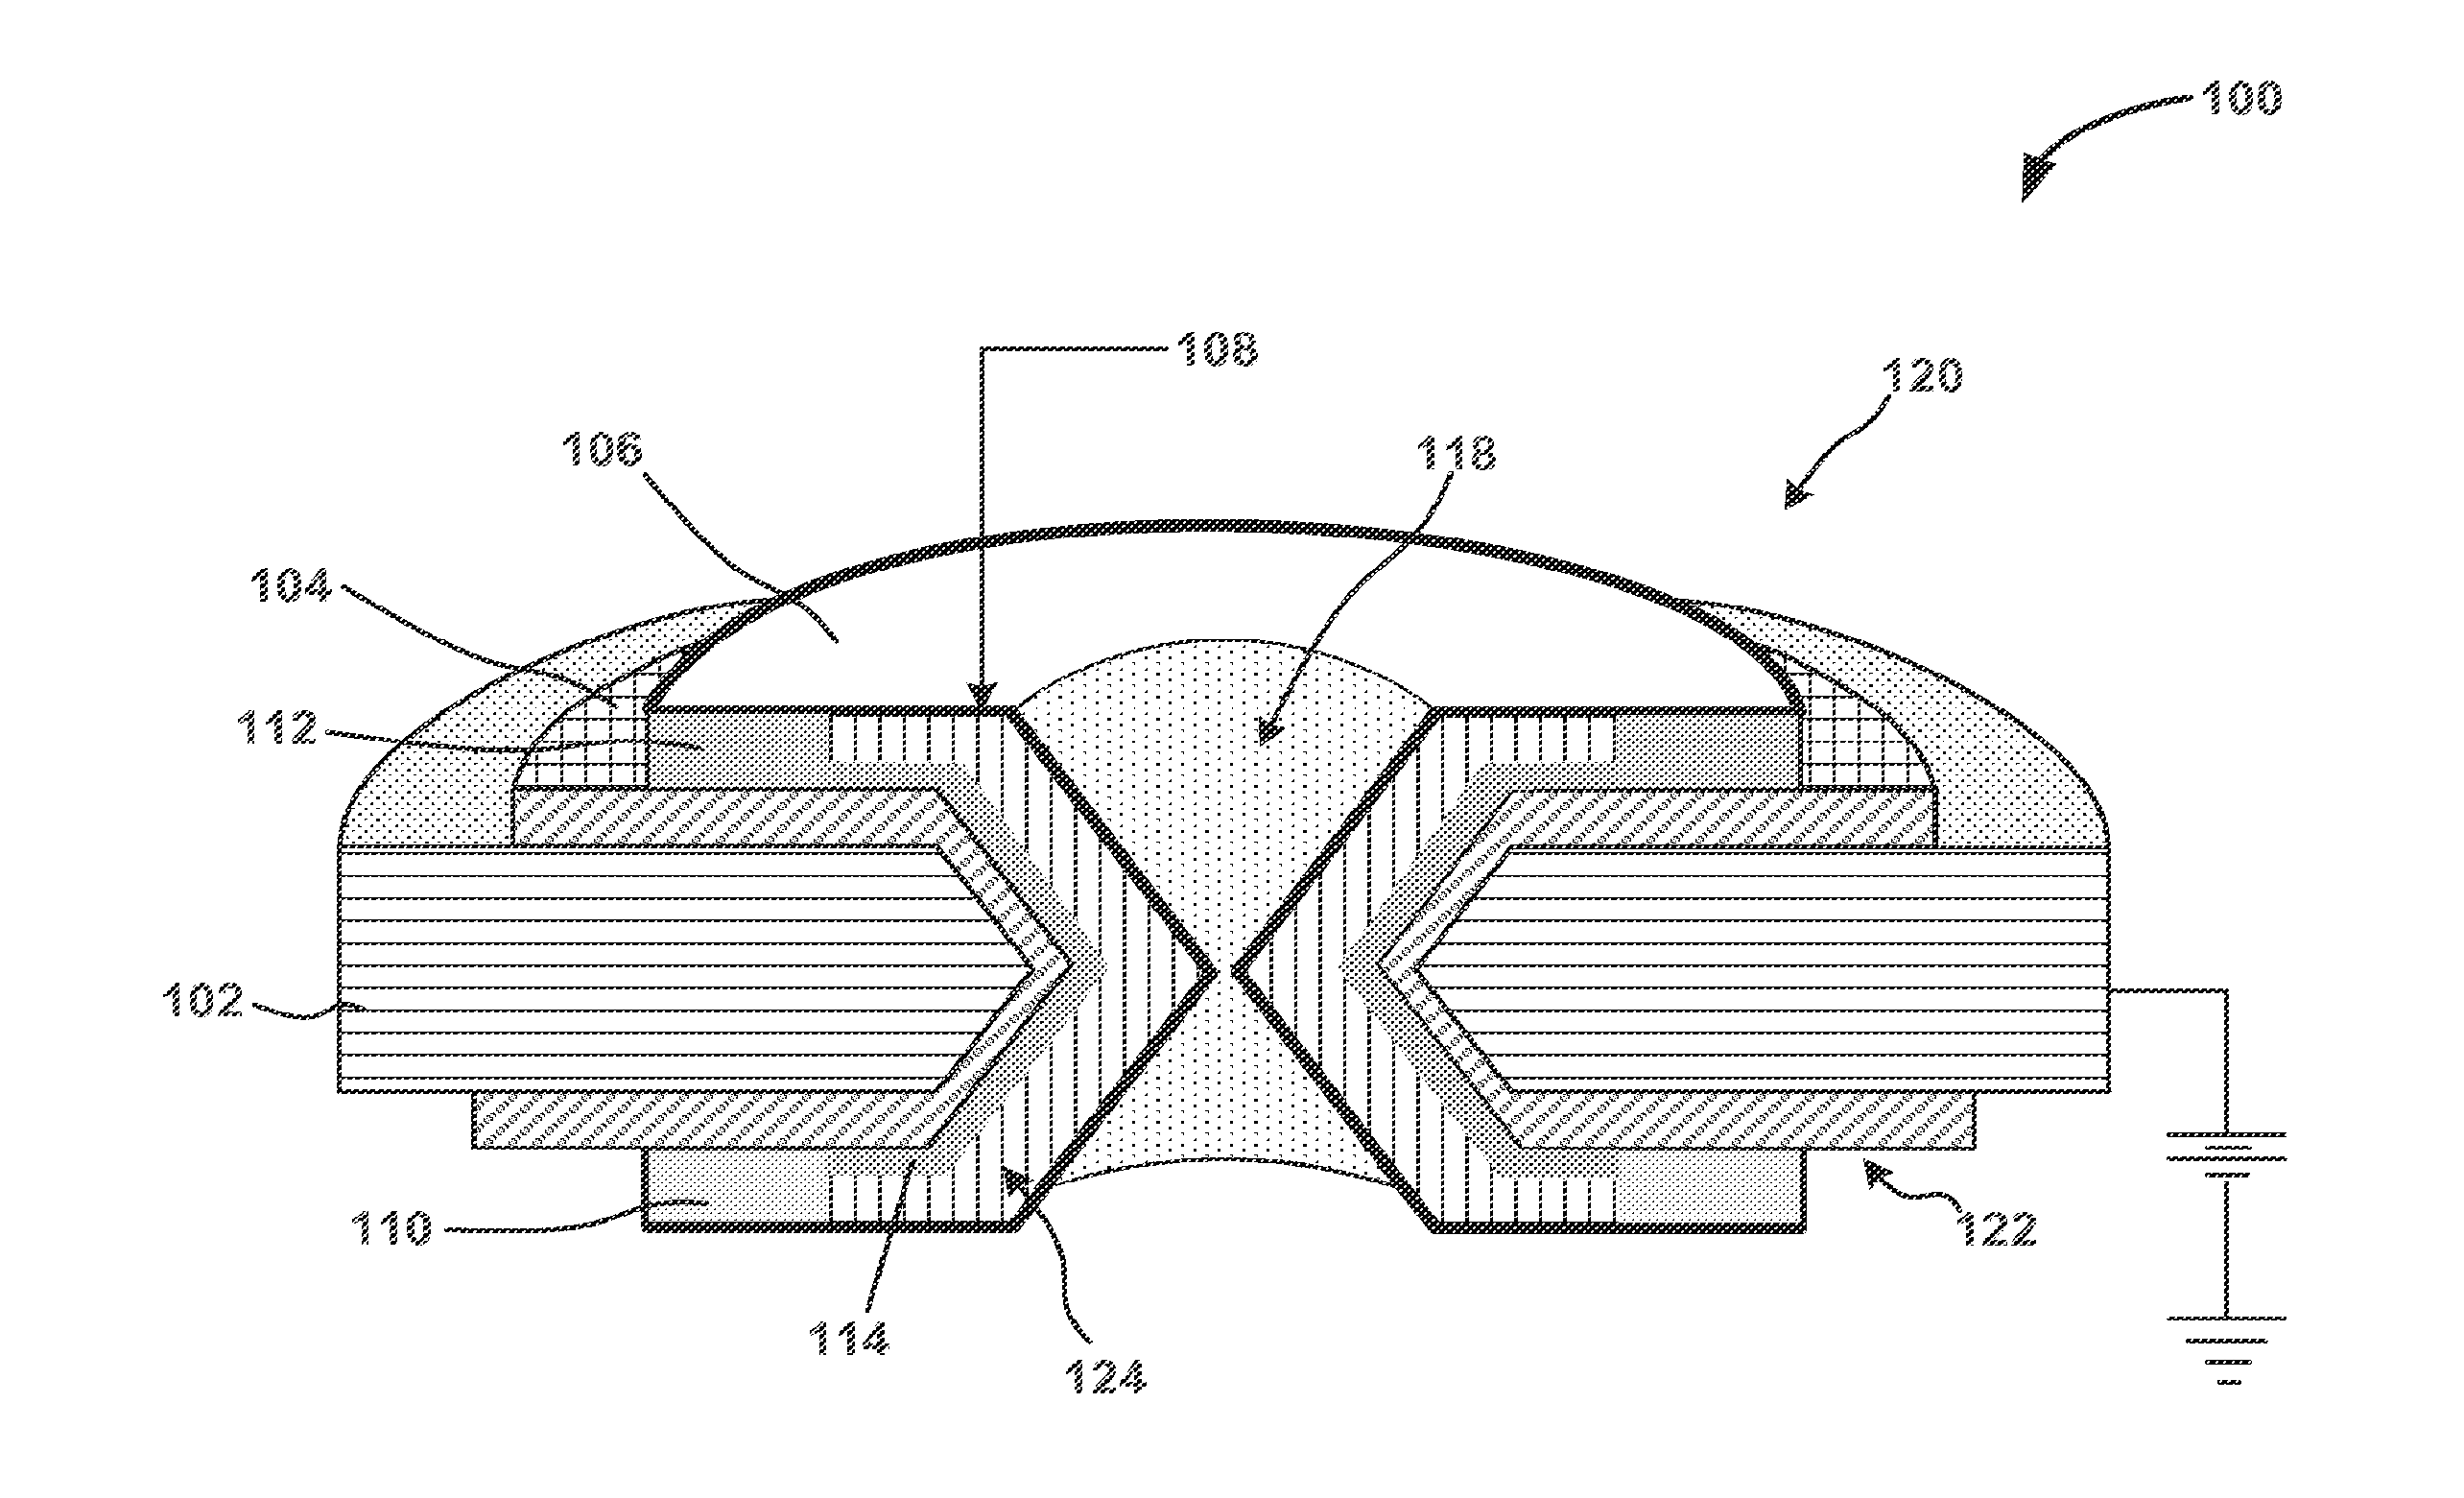 Field effect transistor, device including the transistor, and methods of forming and using same